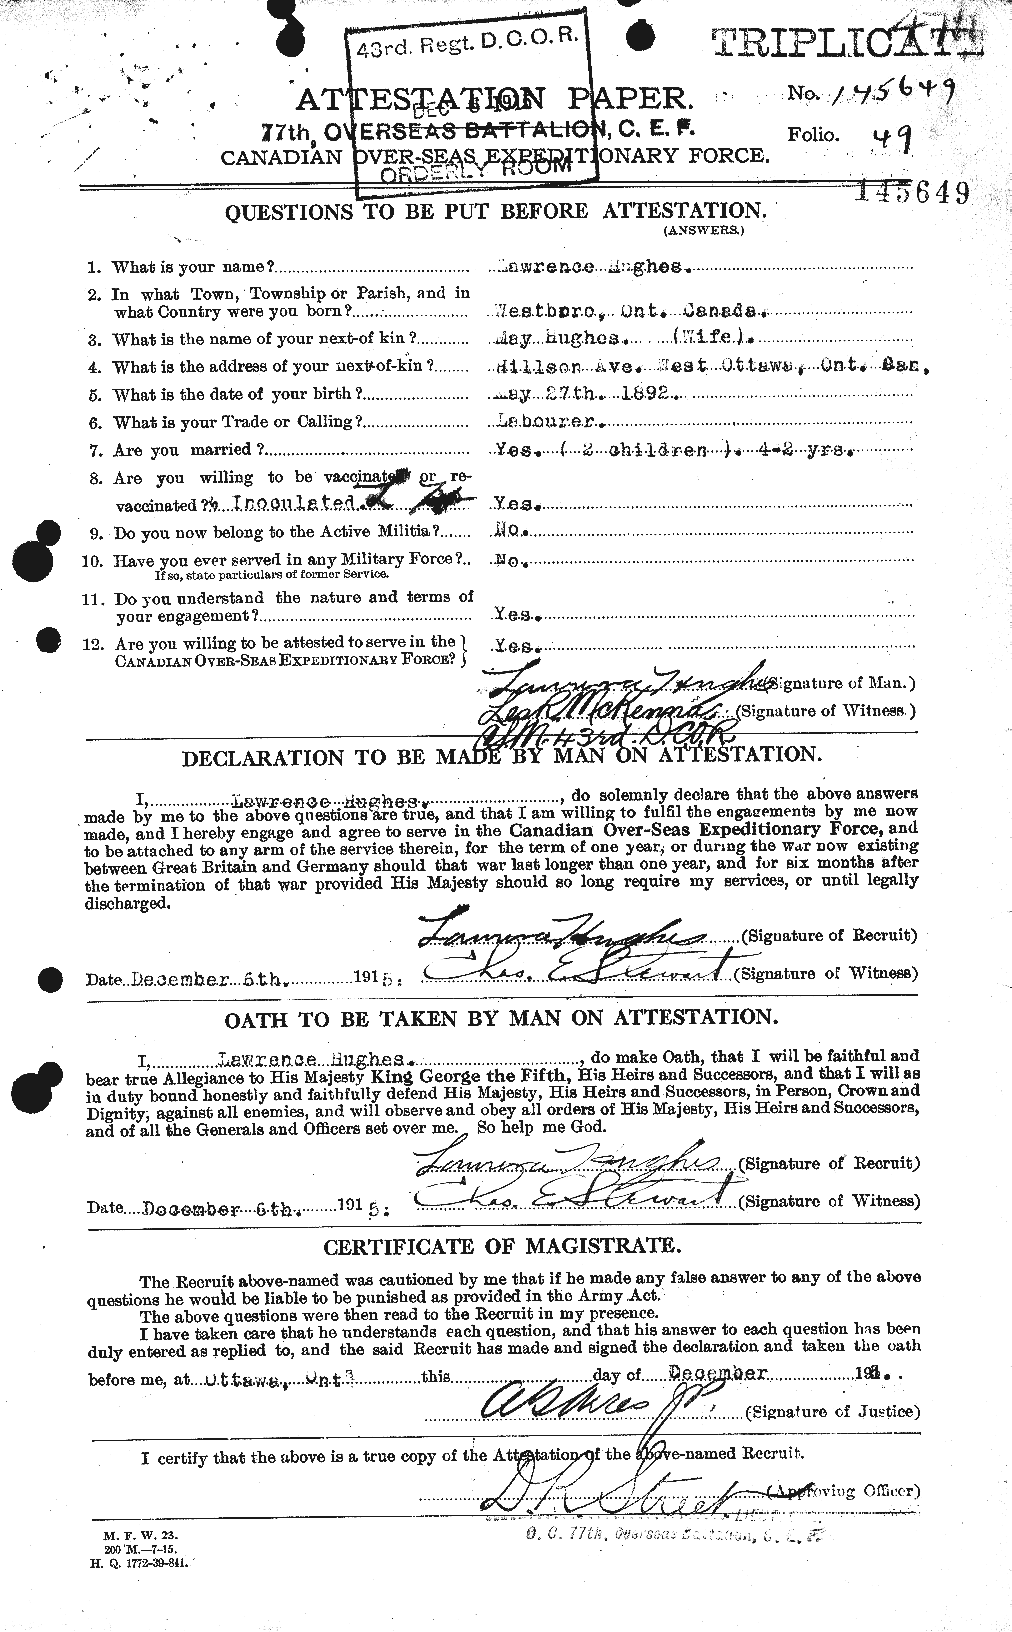 Personnel Records of the First World War - CEF 404095a